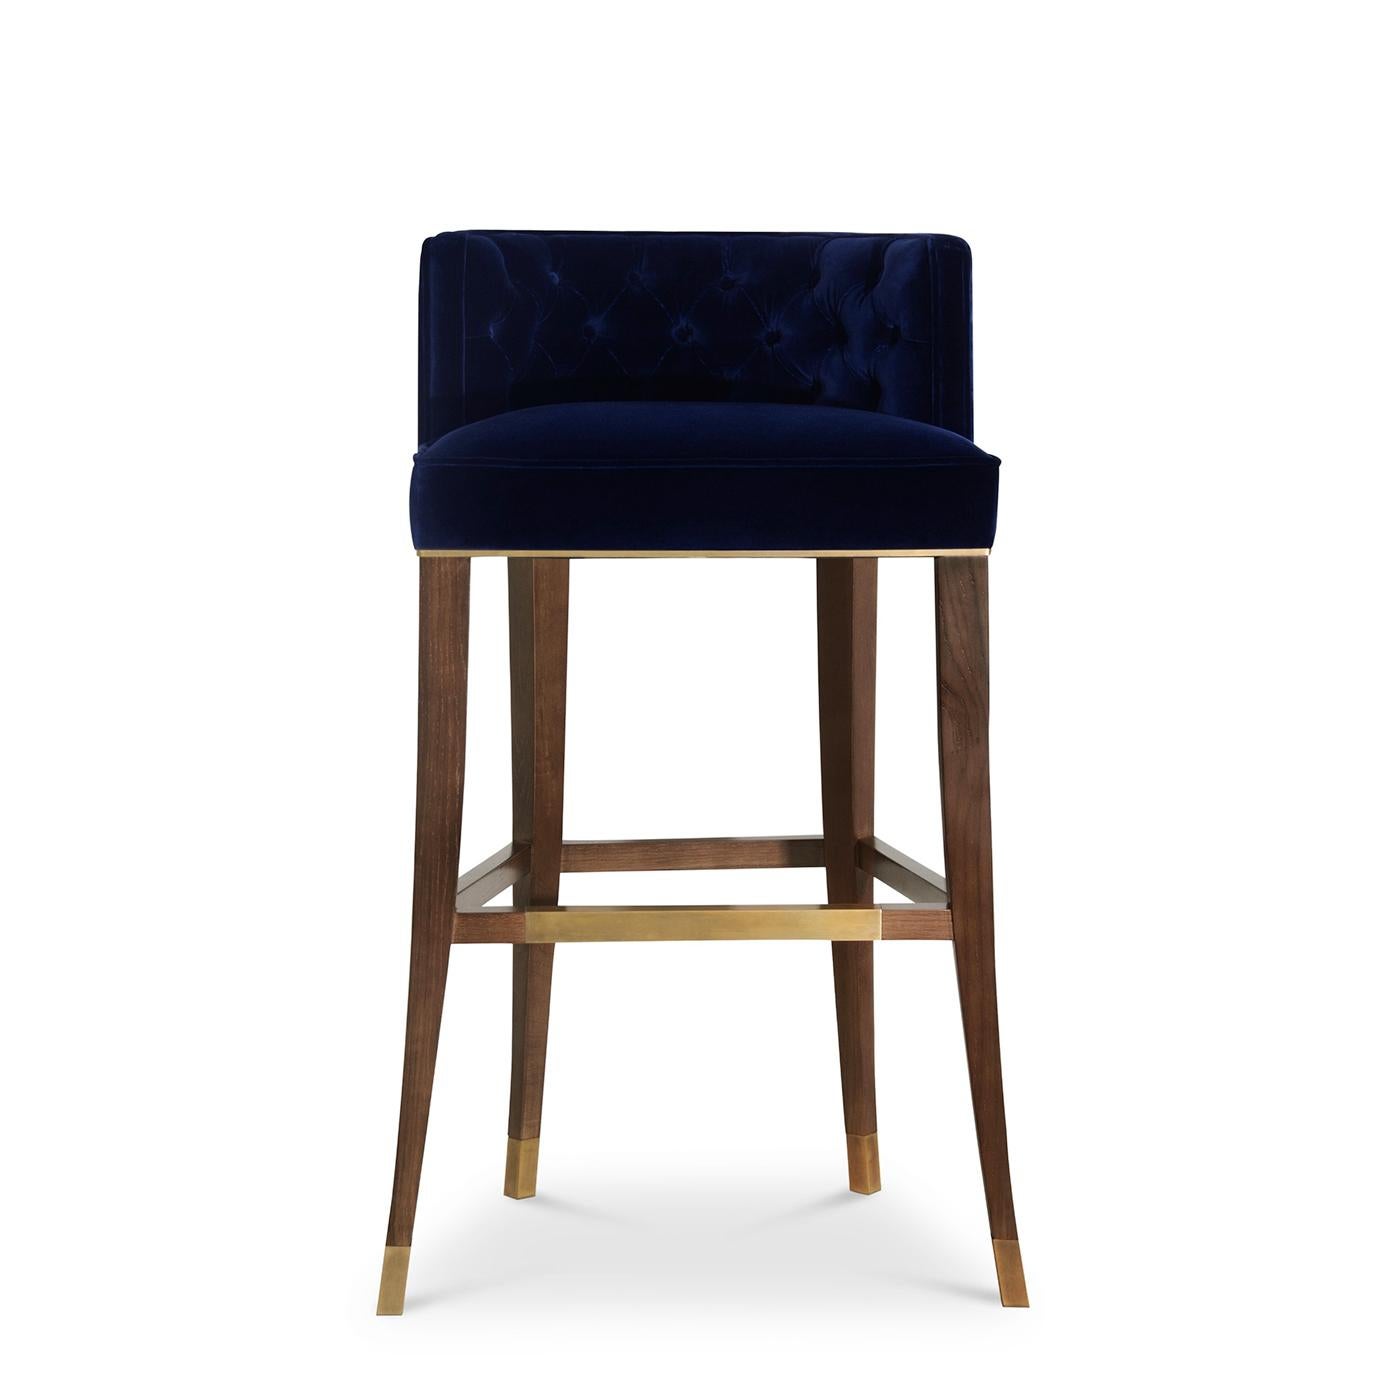 Bar stool Pasadena with solid walnut wood structure,
upholstered and covered with Grade A velvet fabric.
With capitonate backrest. With reinforced footrest and 
feet in solid brass in brushed finish.
Also available with other fabric colors